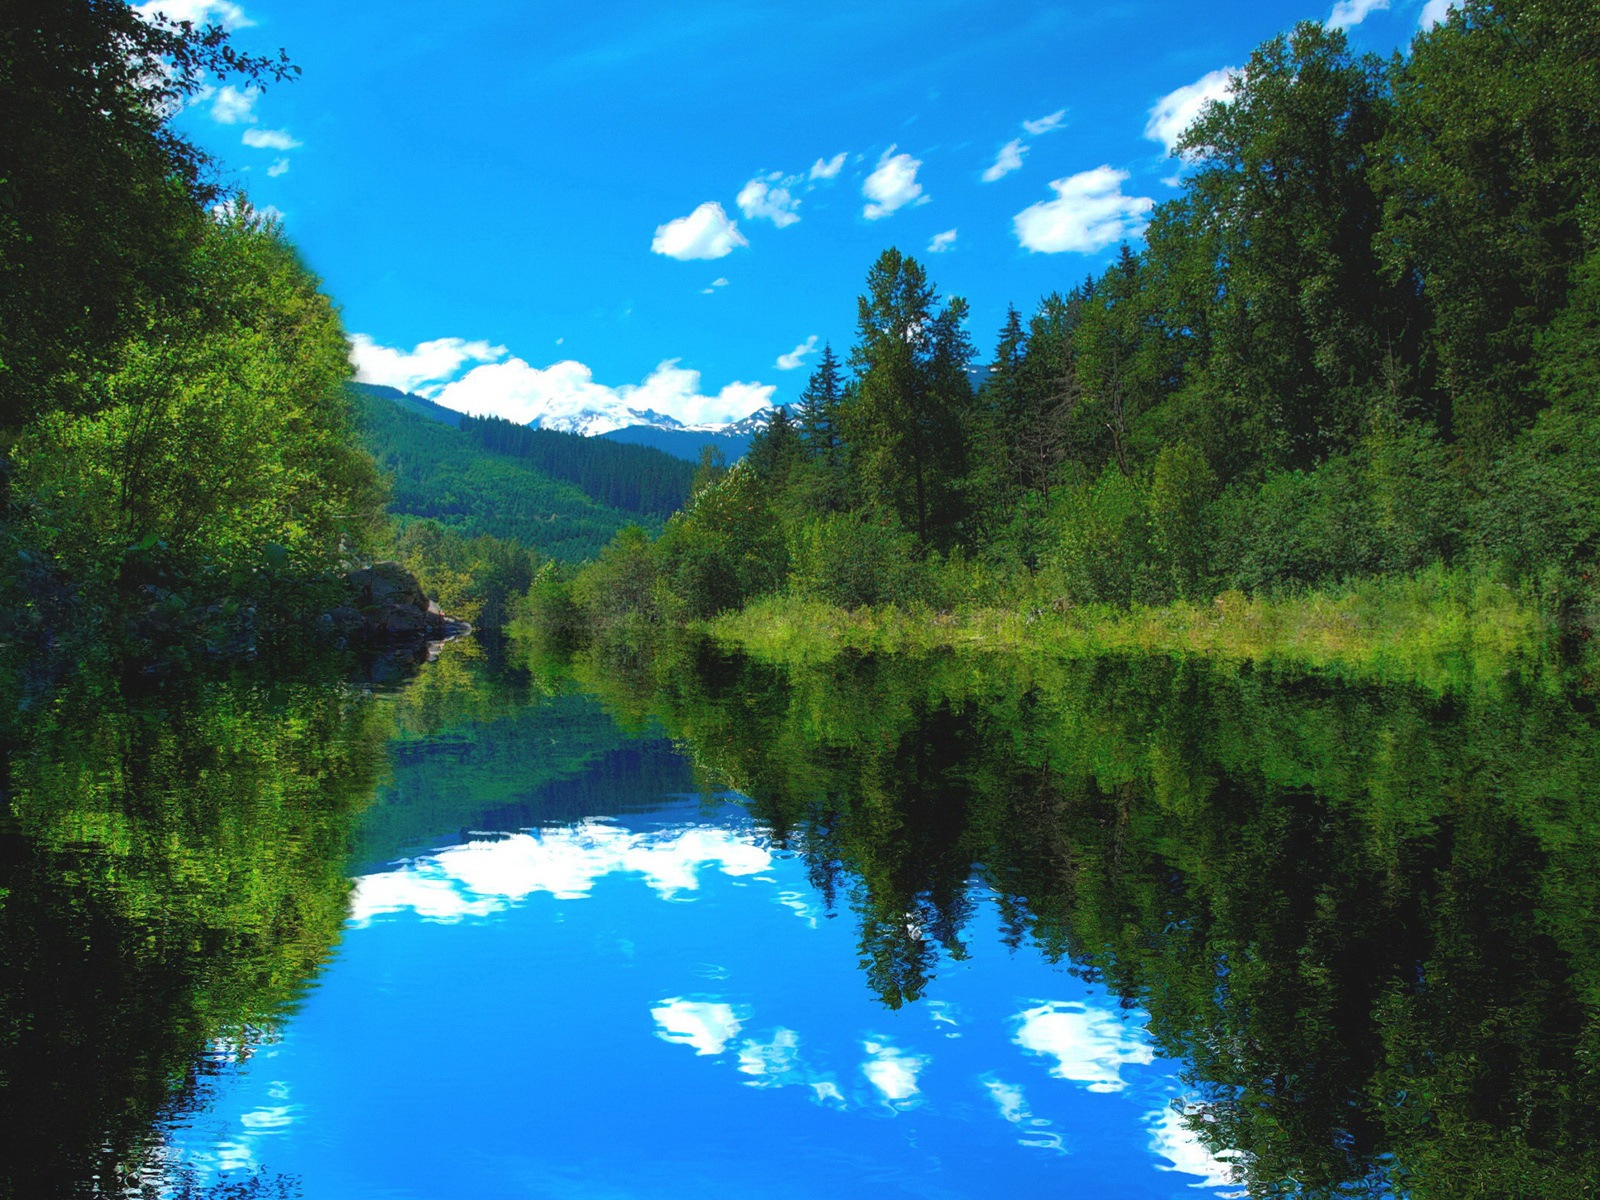 Reflection in the water natural scenery wallpaper #4 - 1600x1200